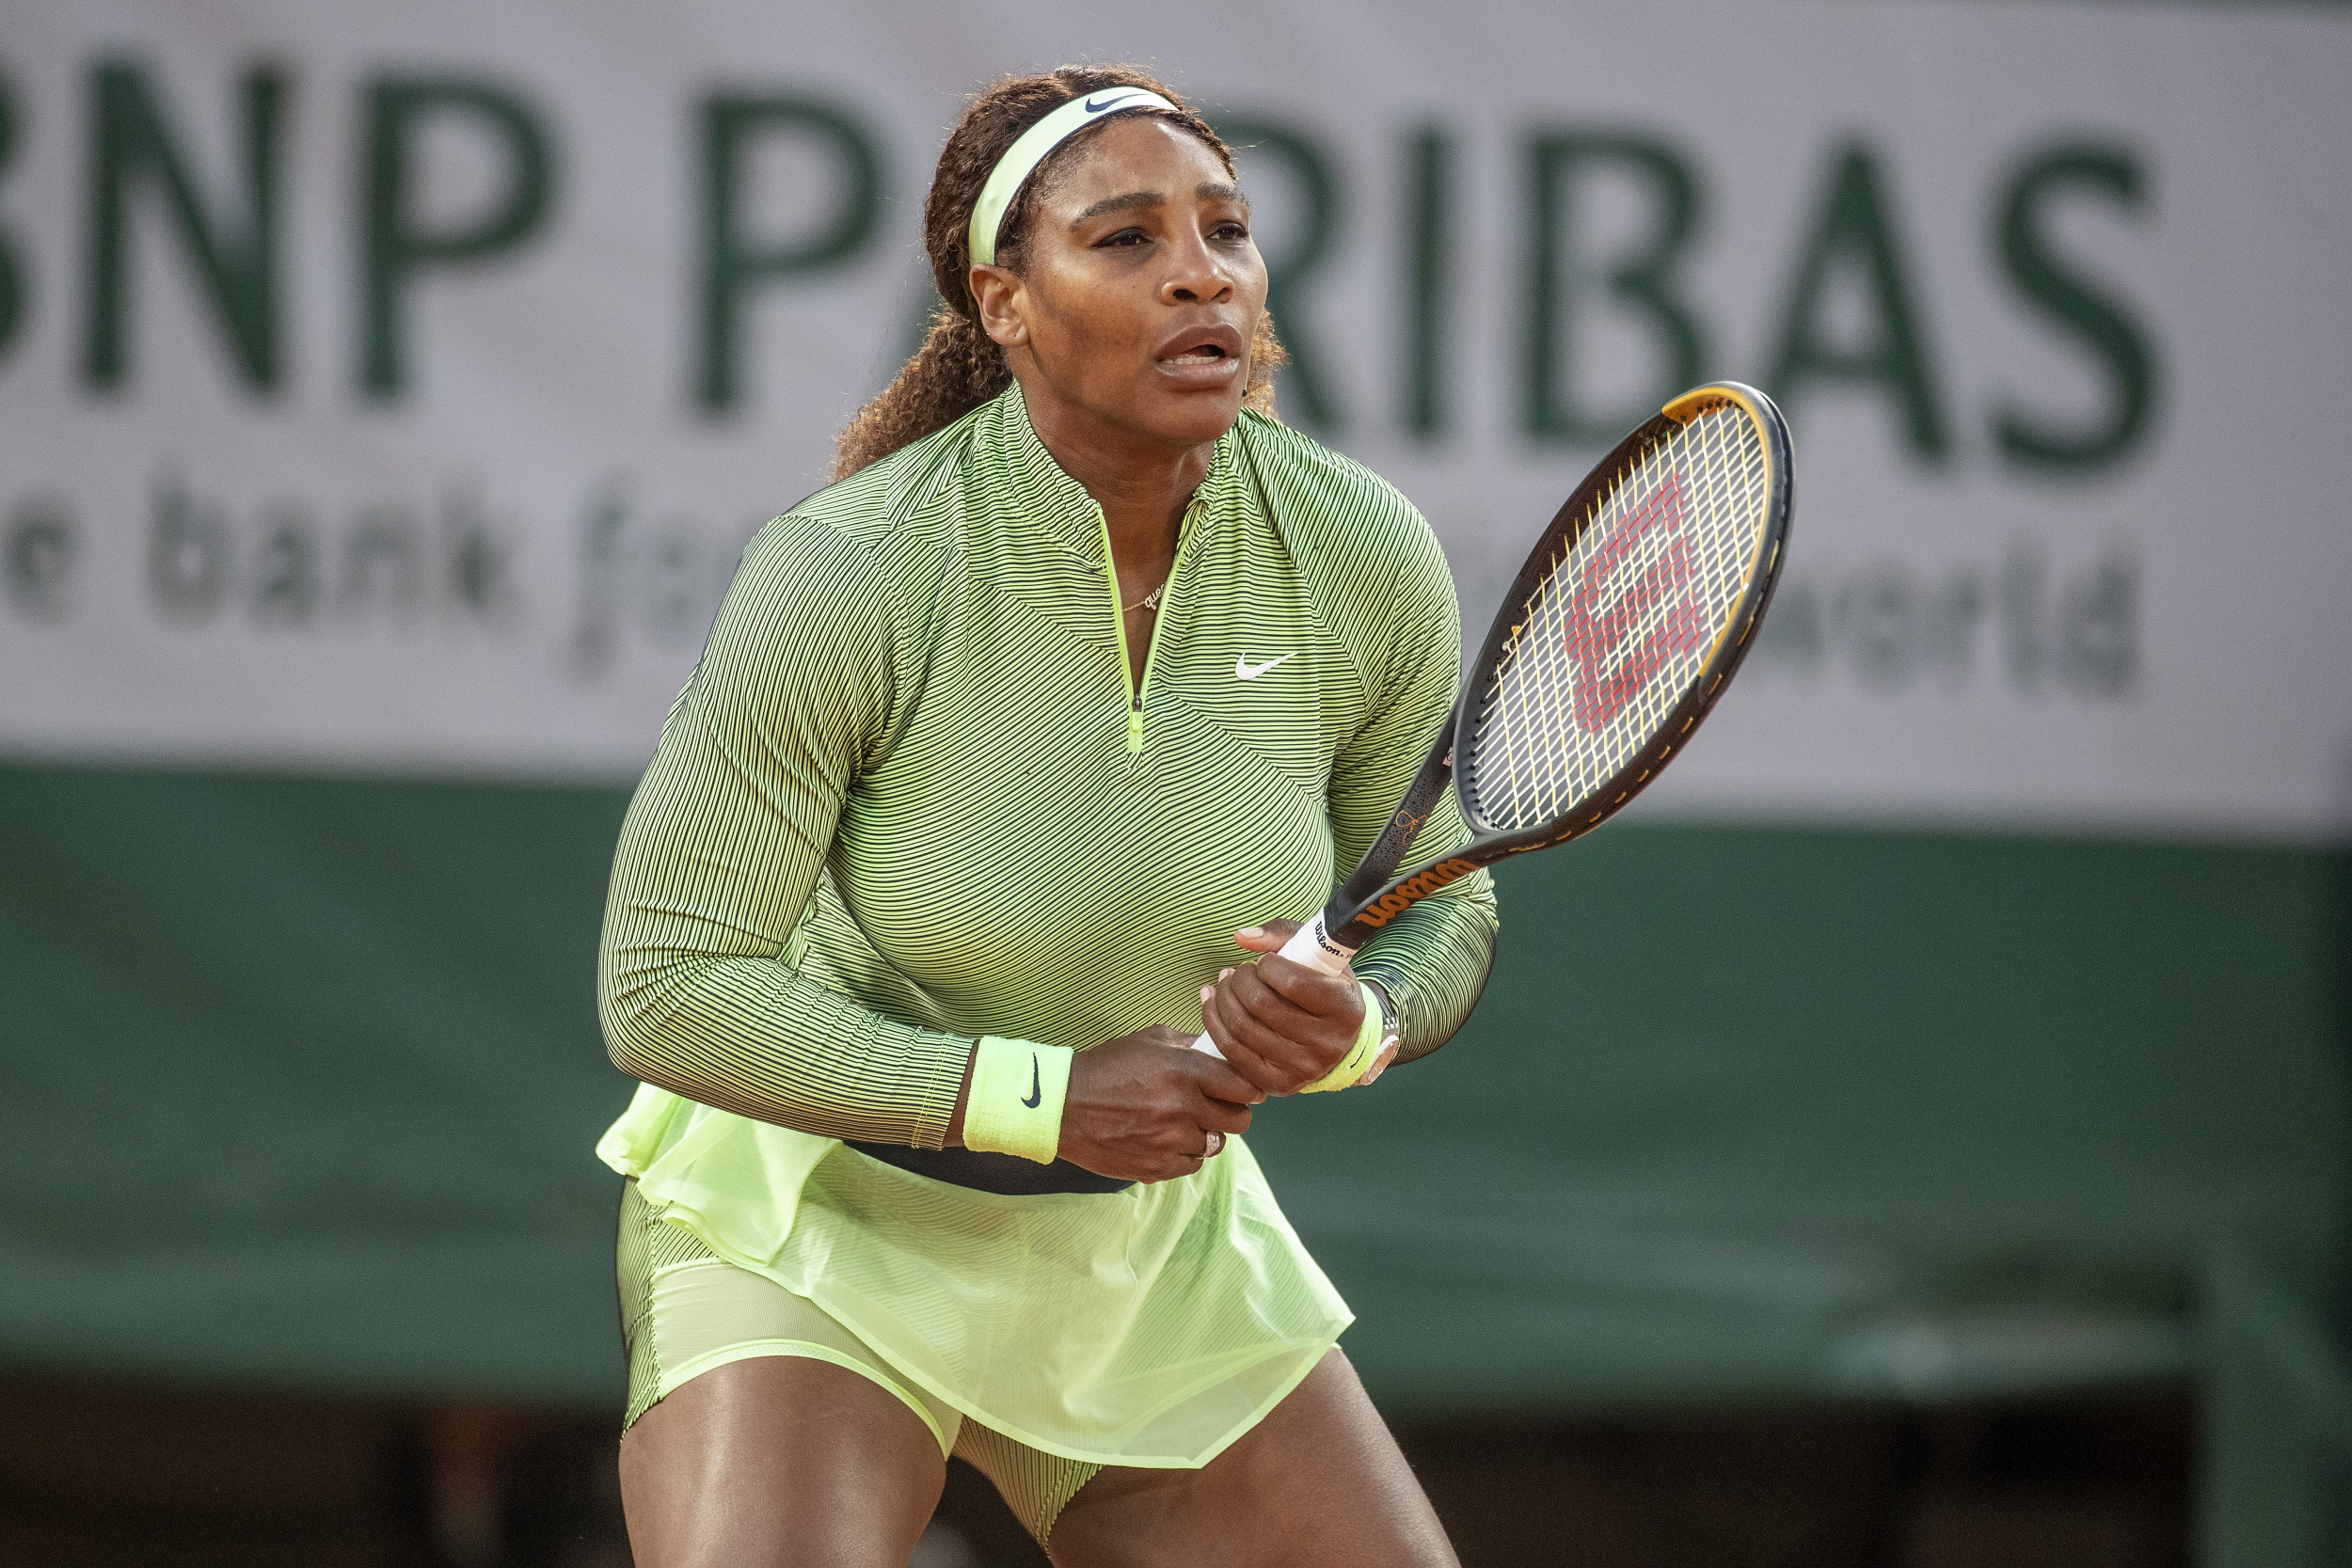 French Open Tennis 2021 How to Watch Serena Williams Second-Round Match, Schedule, Live Stream